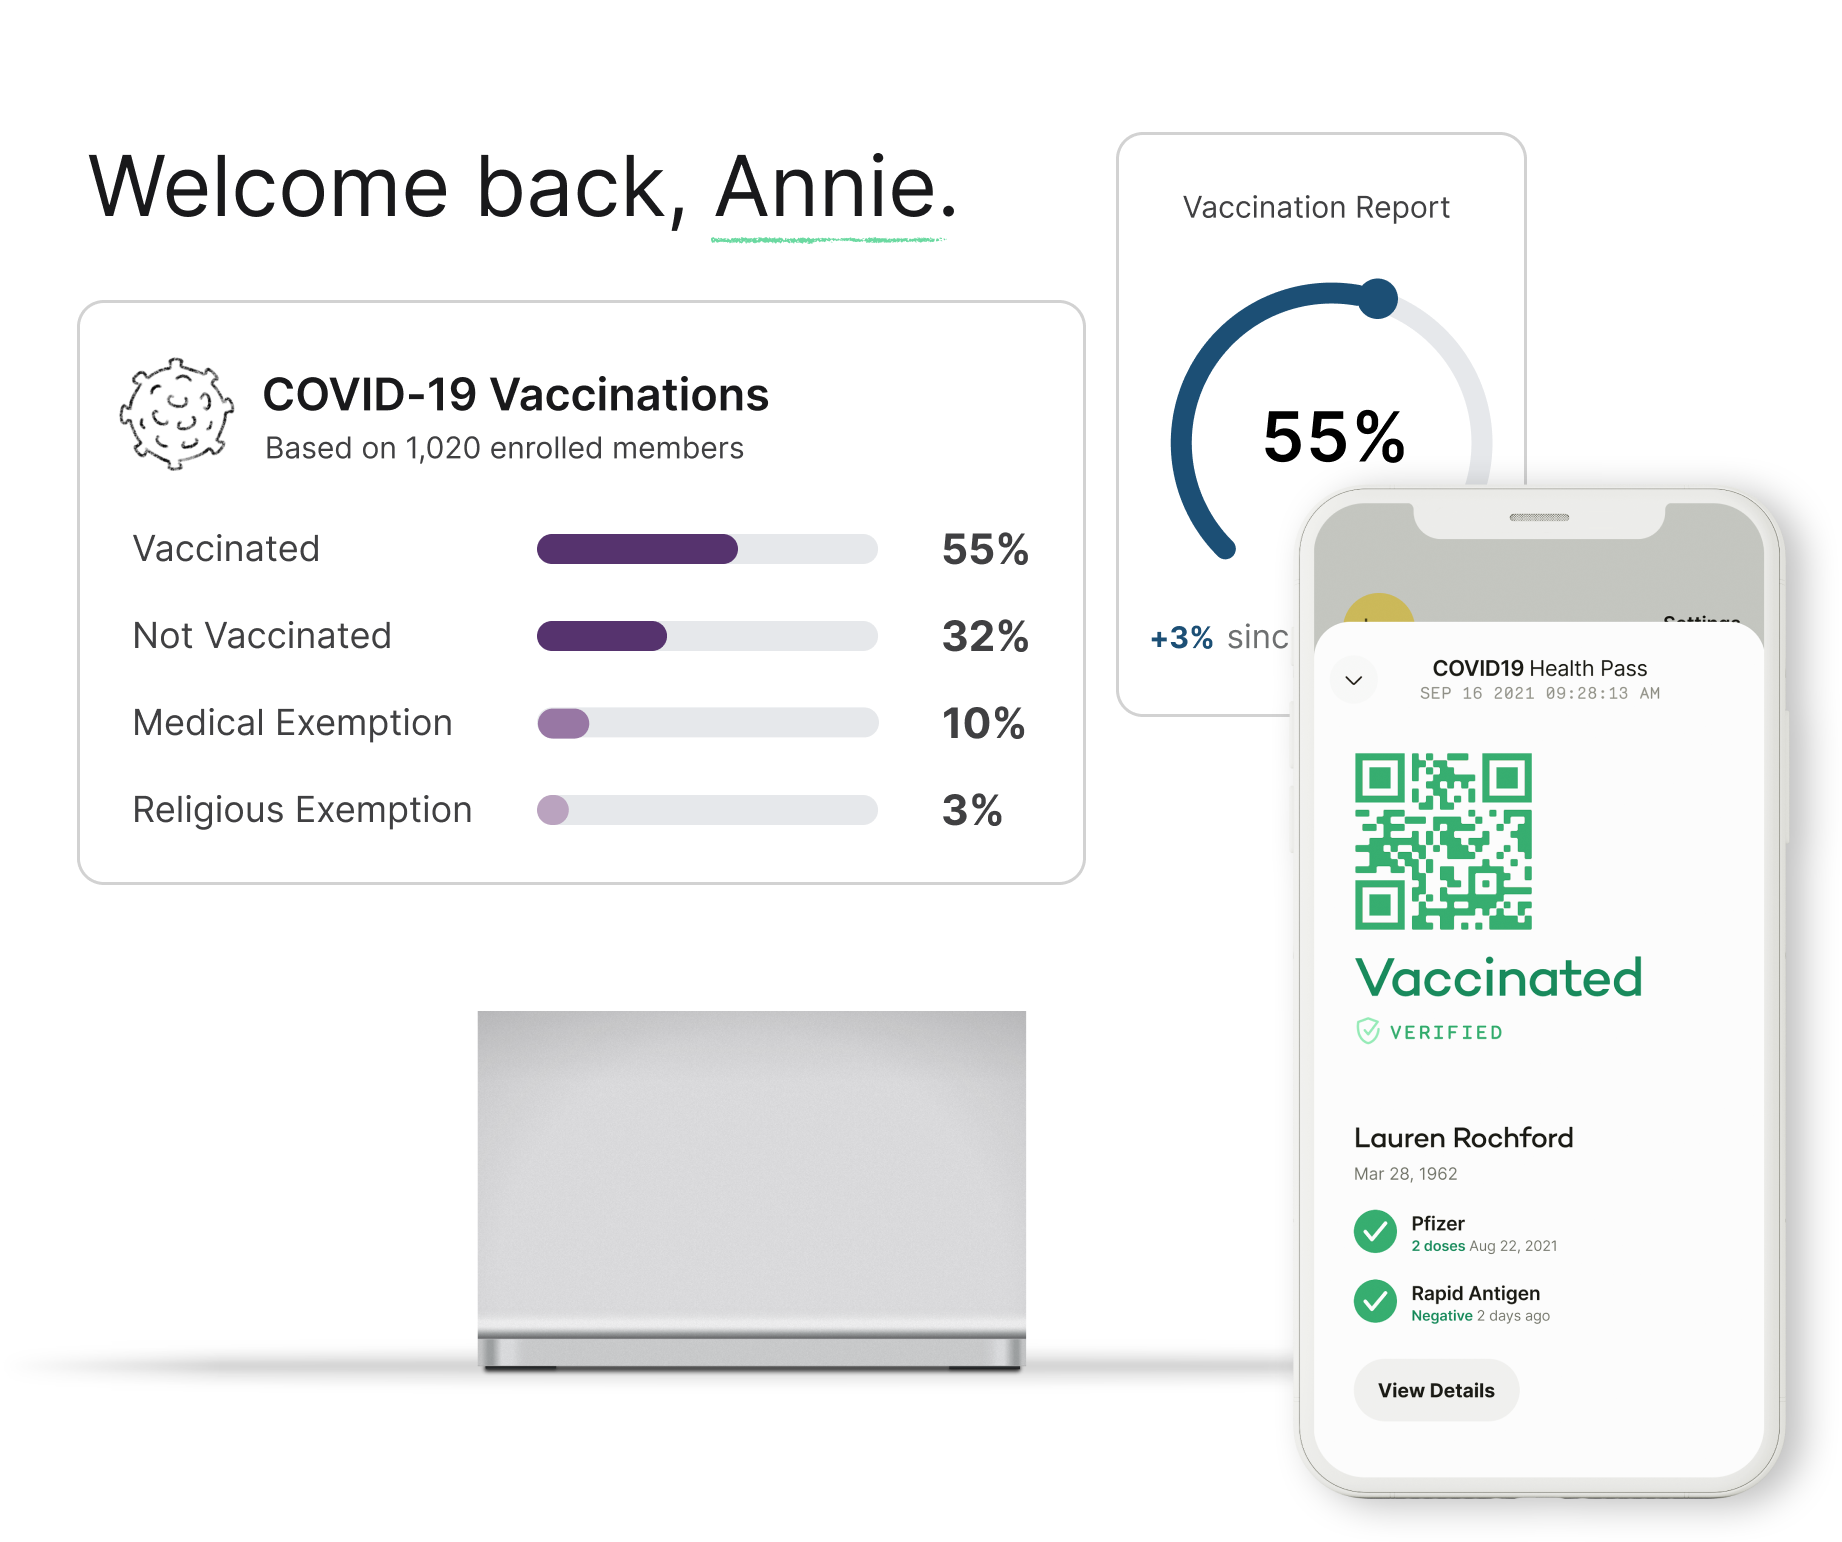 Custom vaccine and testing dashboard and mobile view of an employee’s vaccination records